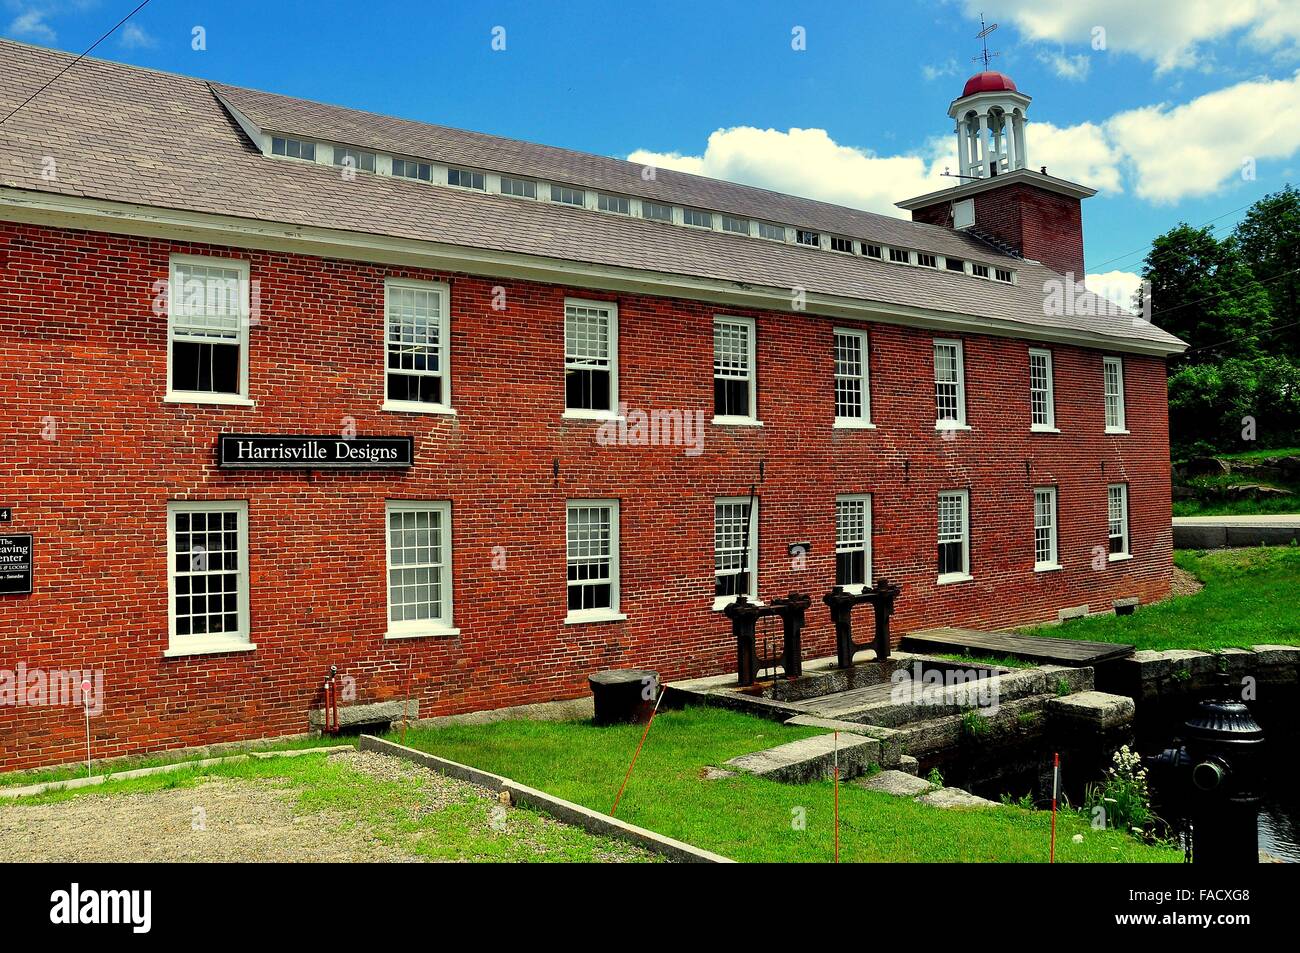 Harrisville, NH: Harrisville Designs at 1848 Mill Number One with its  distinctive bell tower and sluice gates * Stock Photo - Alamy